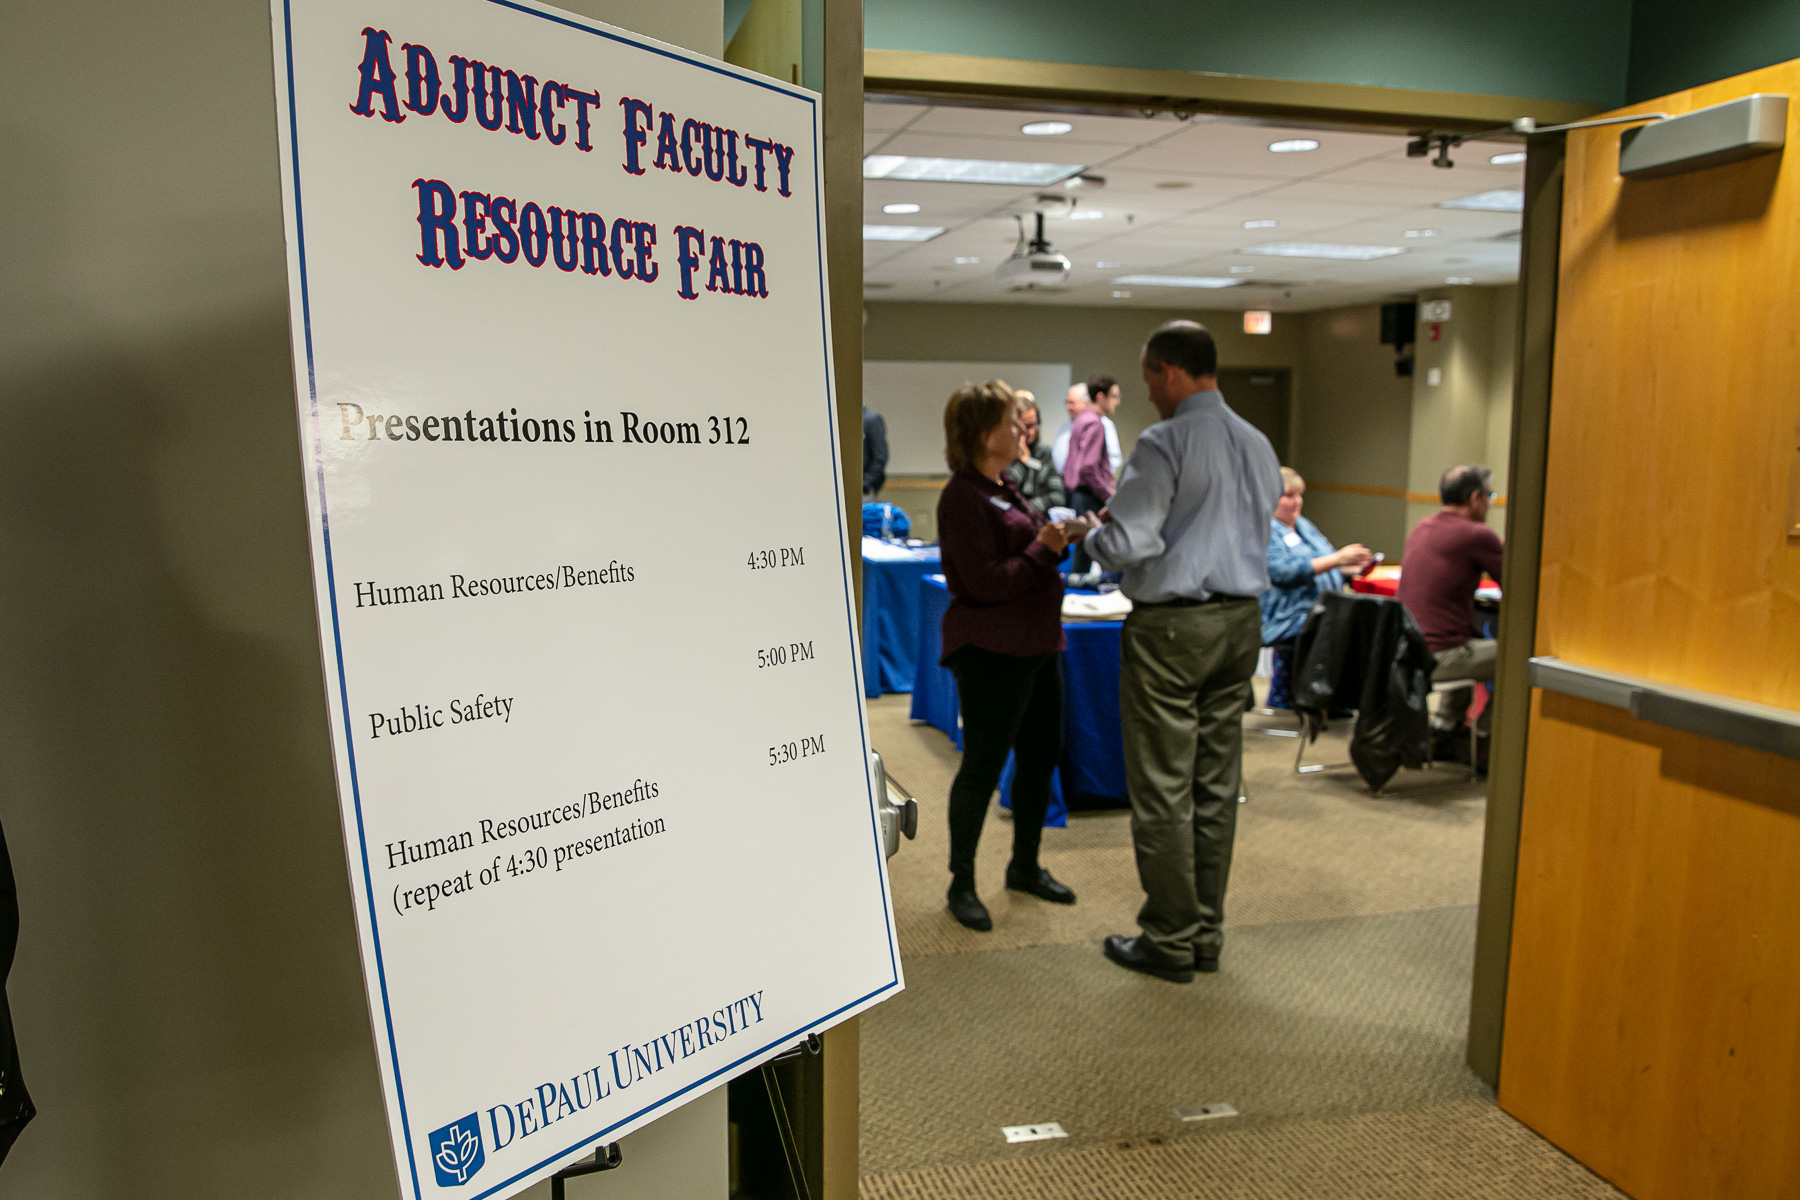 The Workplace Environment Committee (WEC) and Academic Affairs hosts an Adjunct Faculty Resource Fair, Tuesday, Oct. 15, 2019, on DePaul’s Lincoln Park Campus. Part-time faculty members were encouraged to attend and learn about the many resources available to them at DePaul University. (DePaul University/Randall Spriggs)